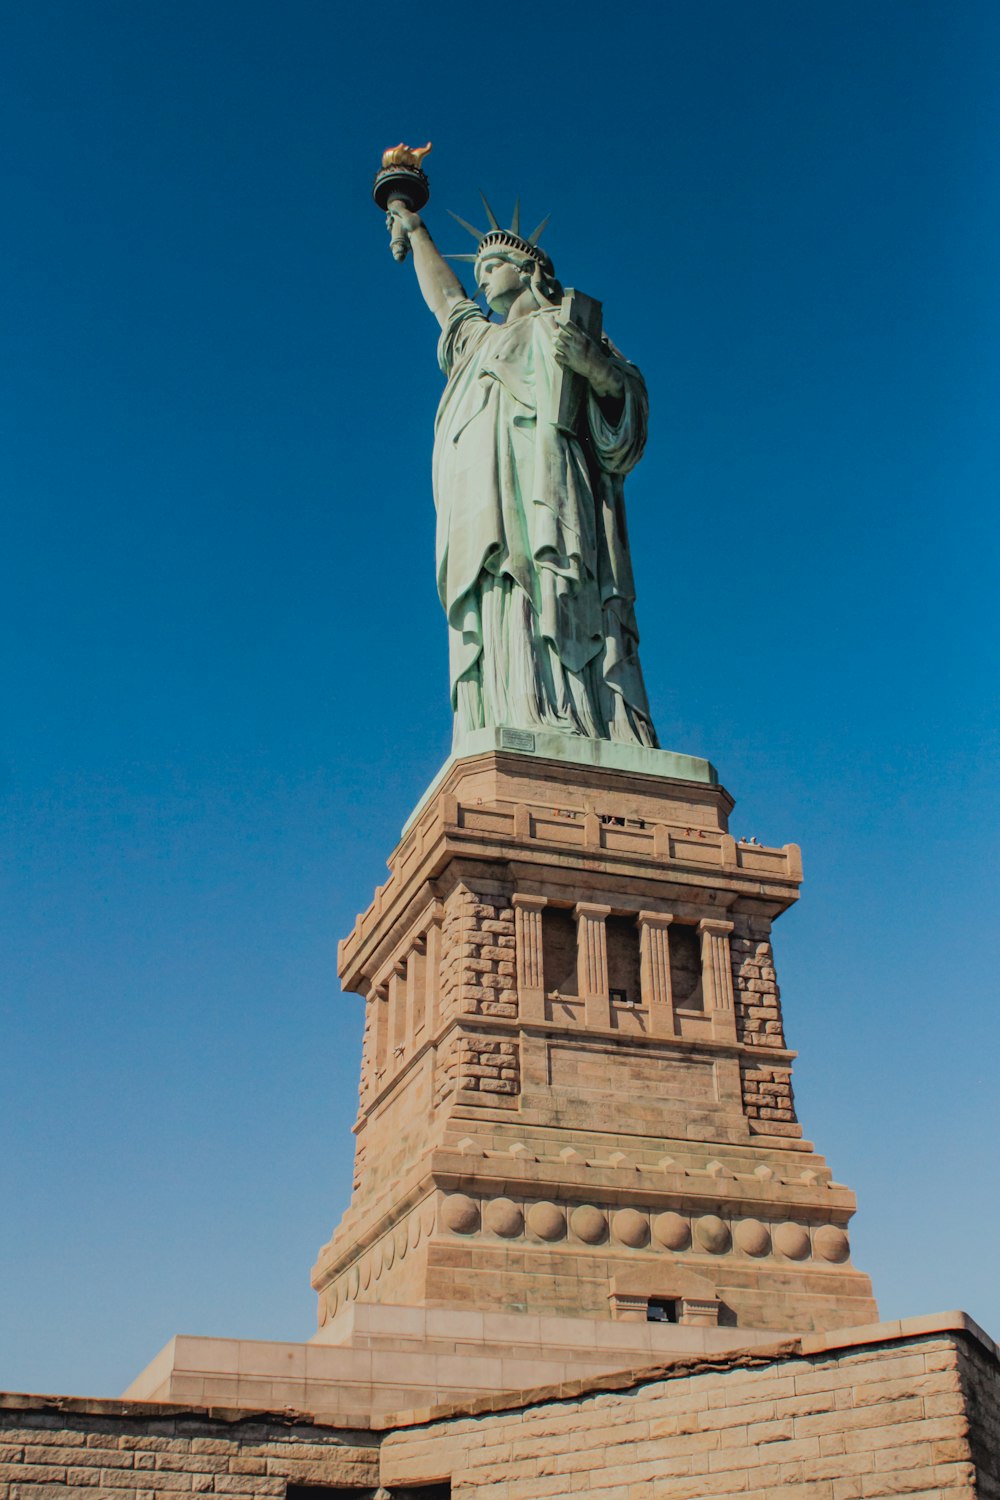 the statue of liberty stands tall against a blue sky